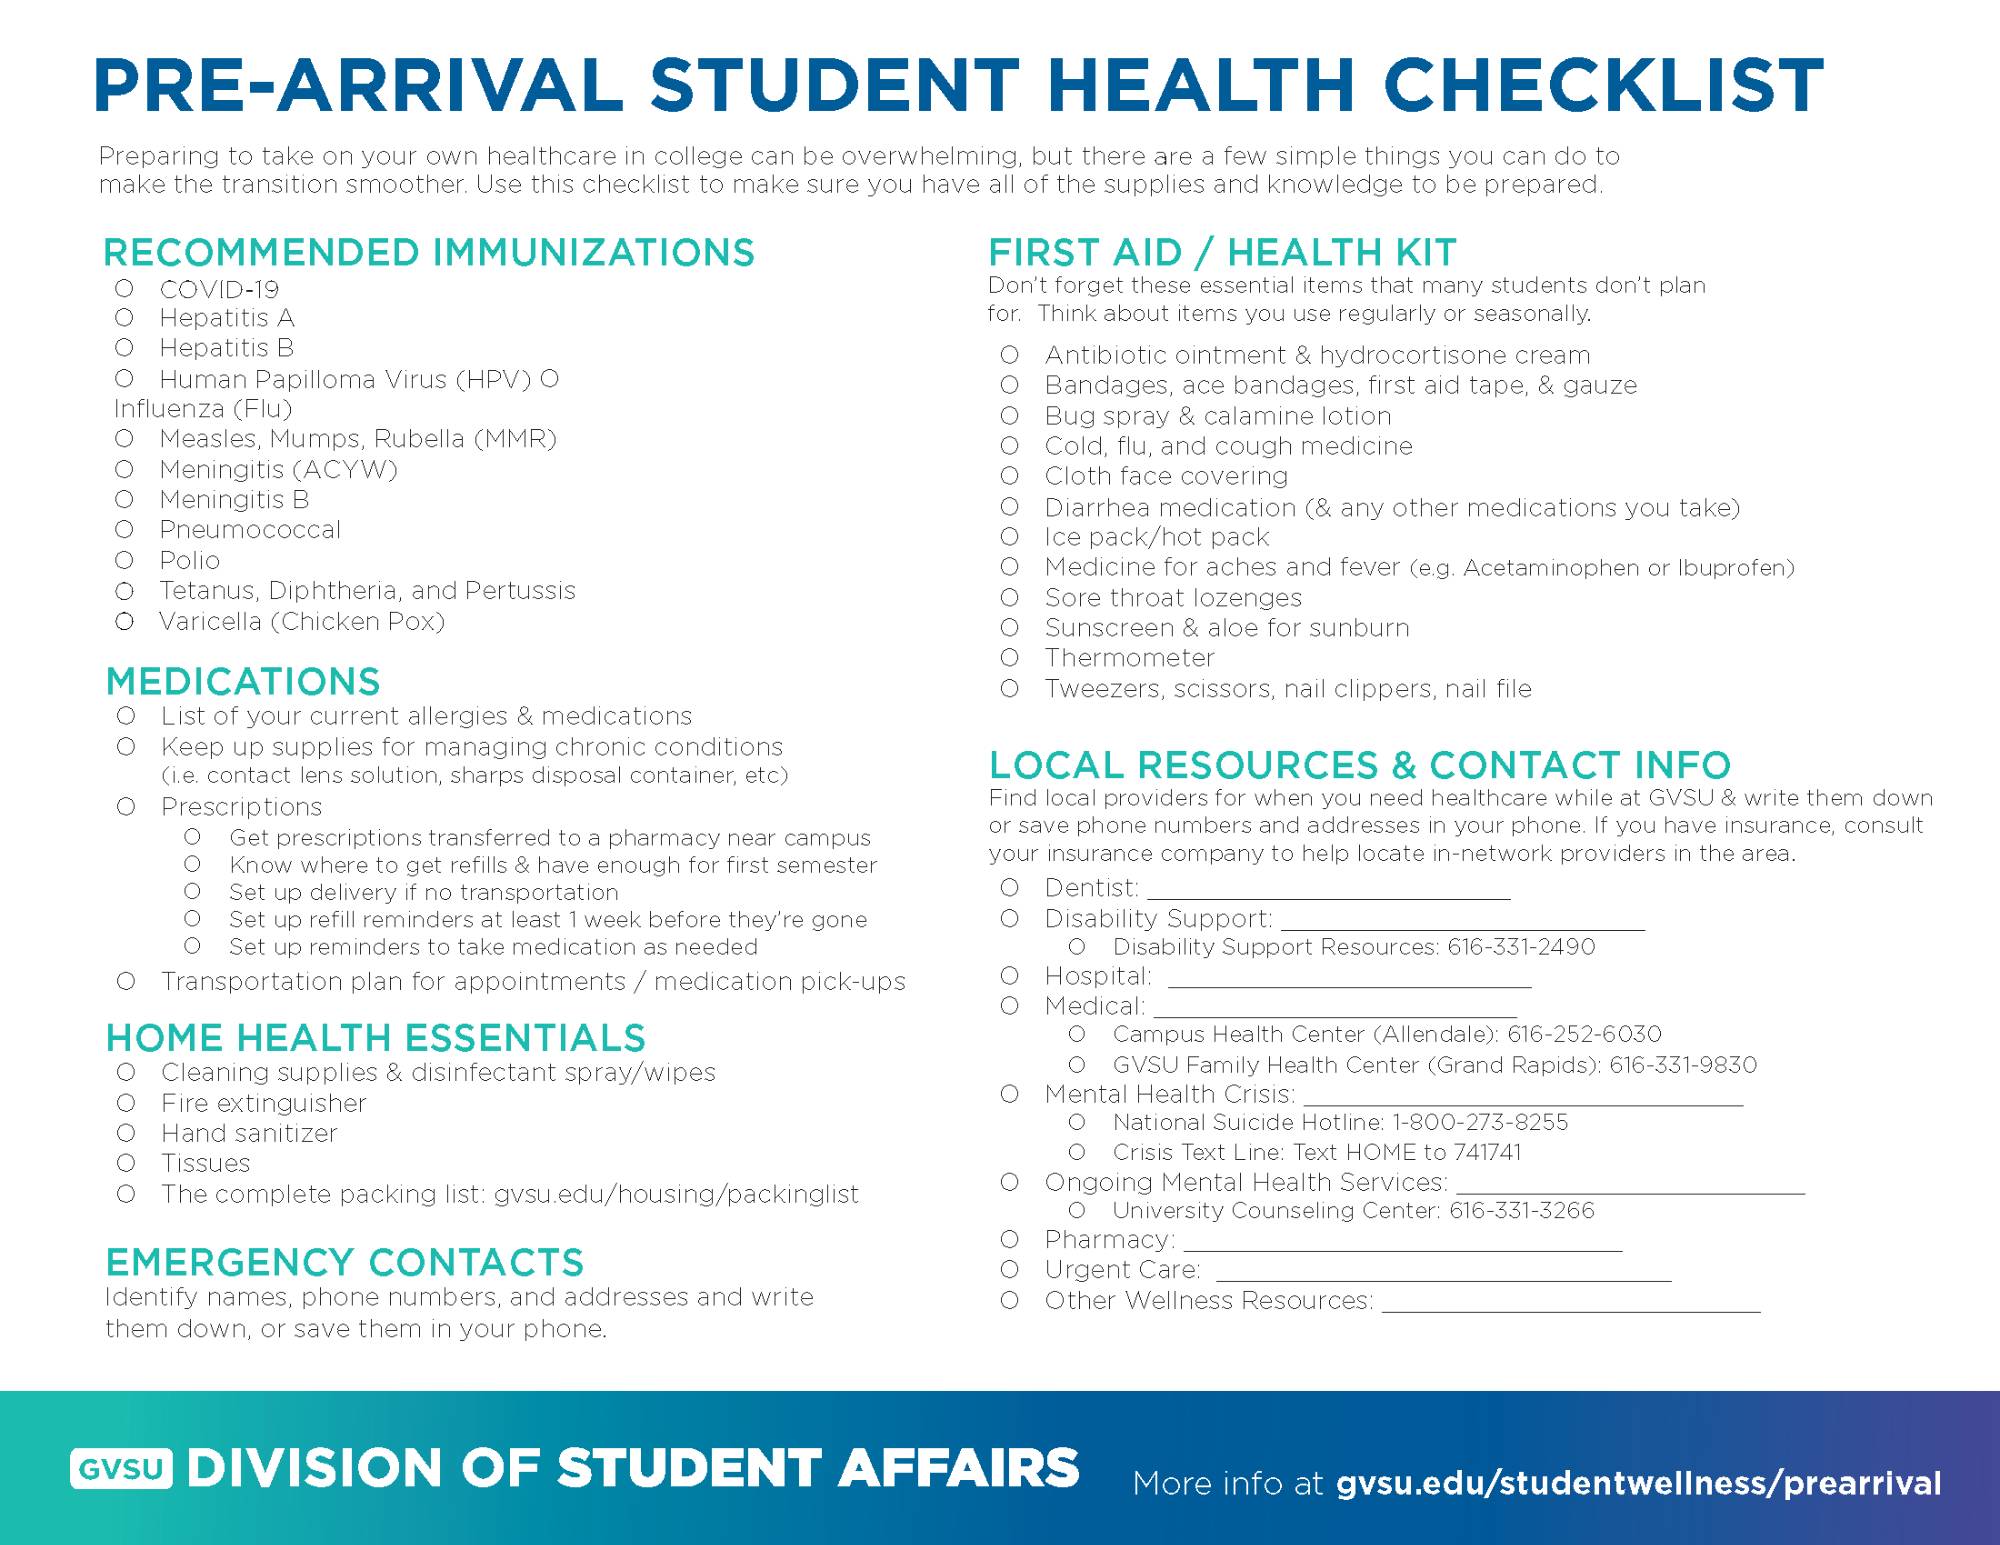 Image of the pre-arrival checklist. Content seen in image found on this webpage.